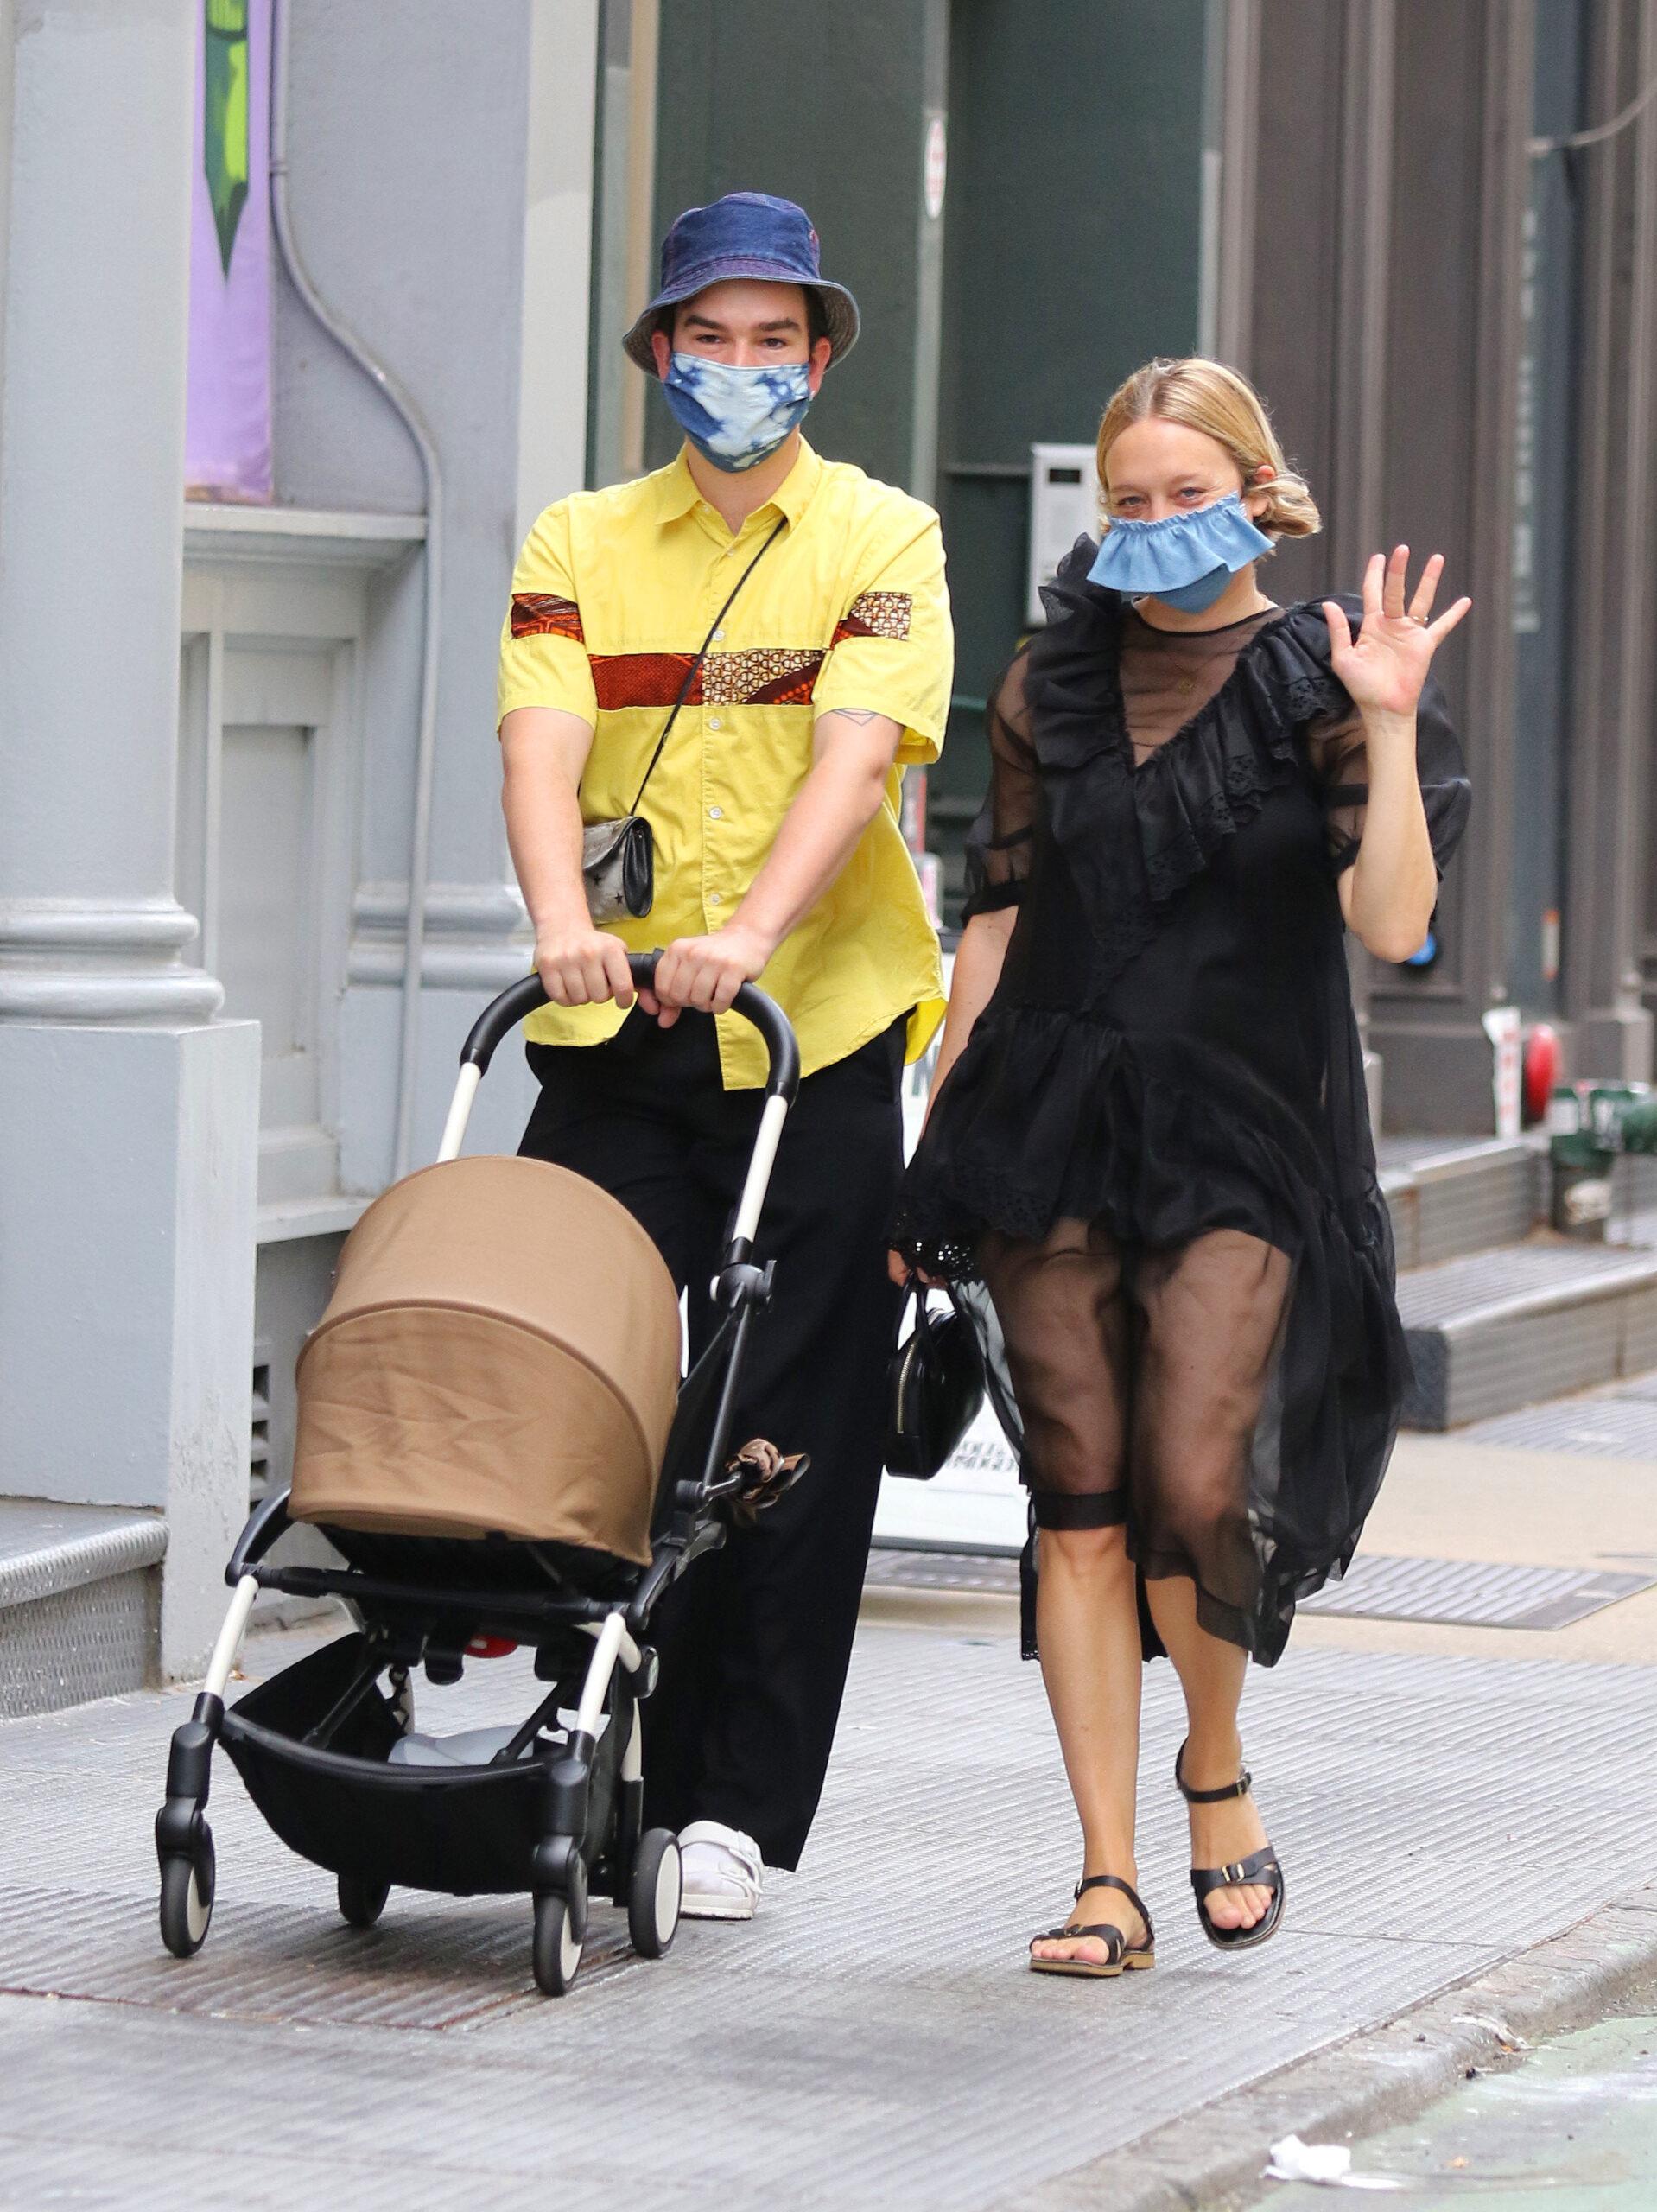 Chloe Sevigny and Sinisa Mackovic are all smiles under their masks while strolling with their newborn son. The happy parents where out shopping in Manhattan's Soho area. 02 Aug 2020 